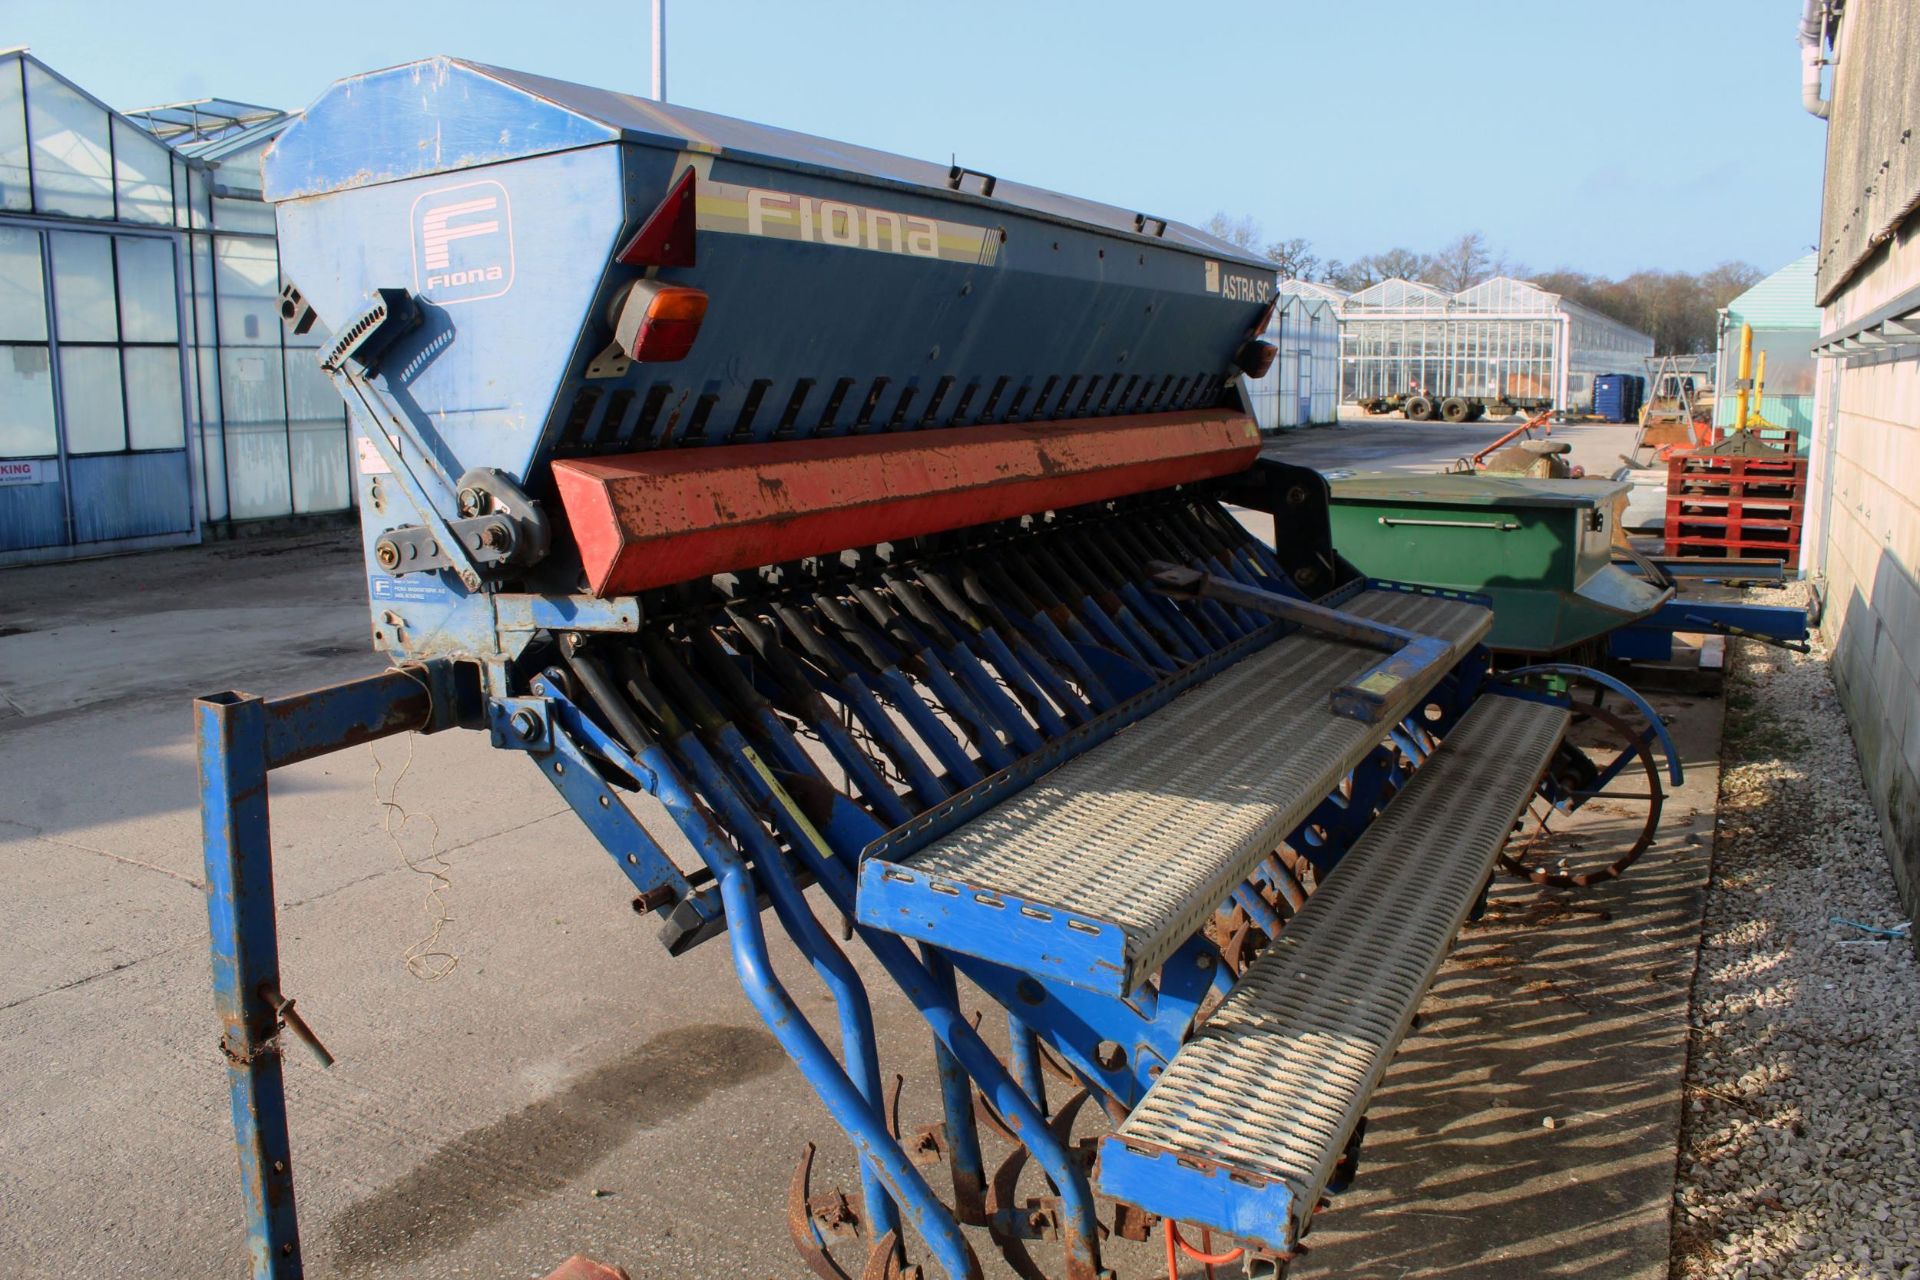 FIONA ASTRA SC 3 METRE SEED DRILL WITH MOUNTING BRACKETS FOR A KHUN POWER HARROW & ELECTRIC TRAM - Image 2 of 6